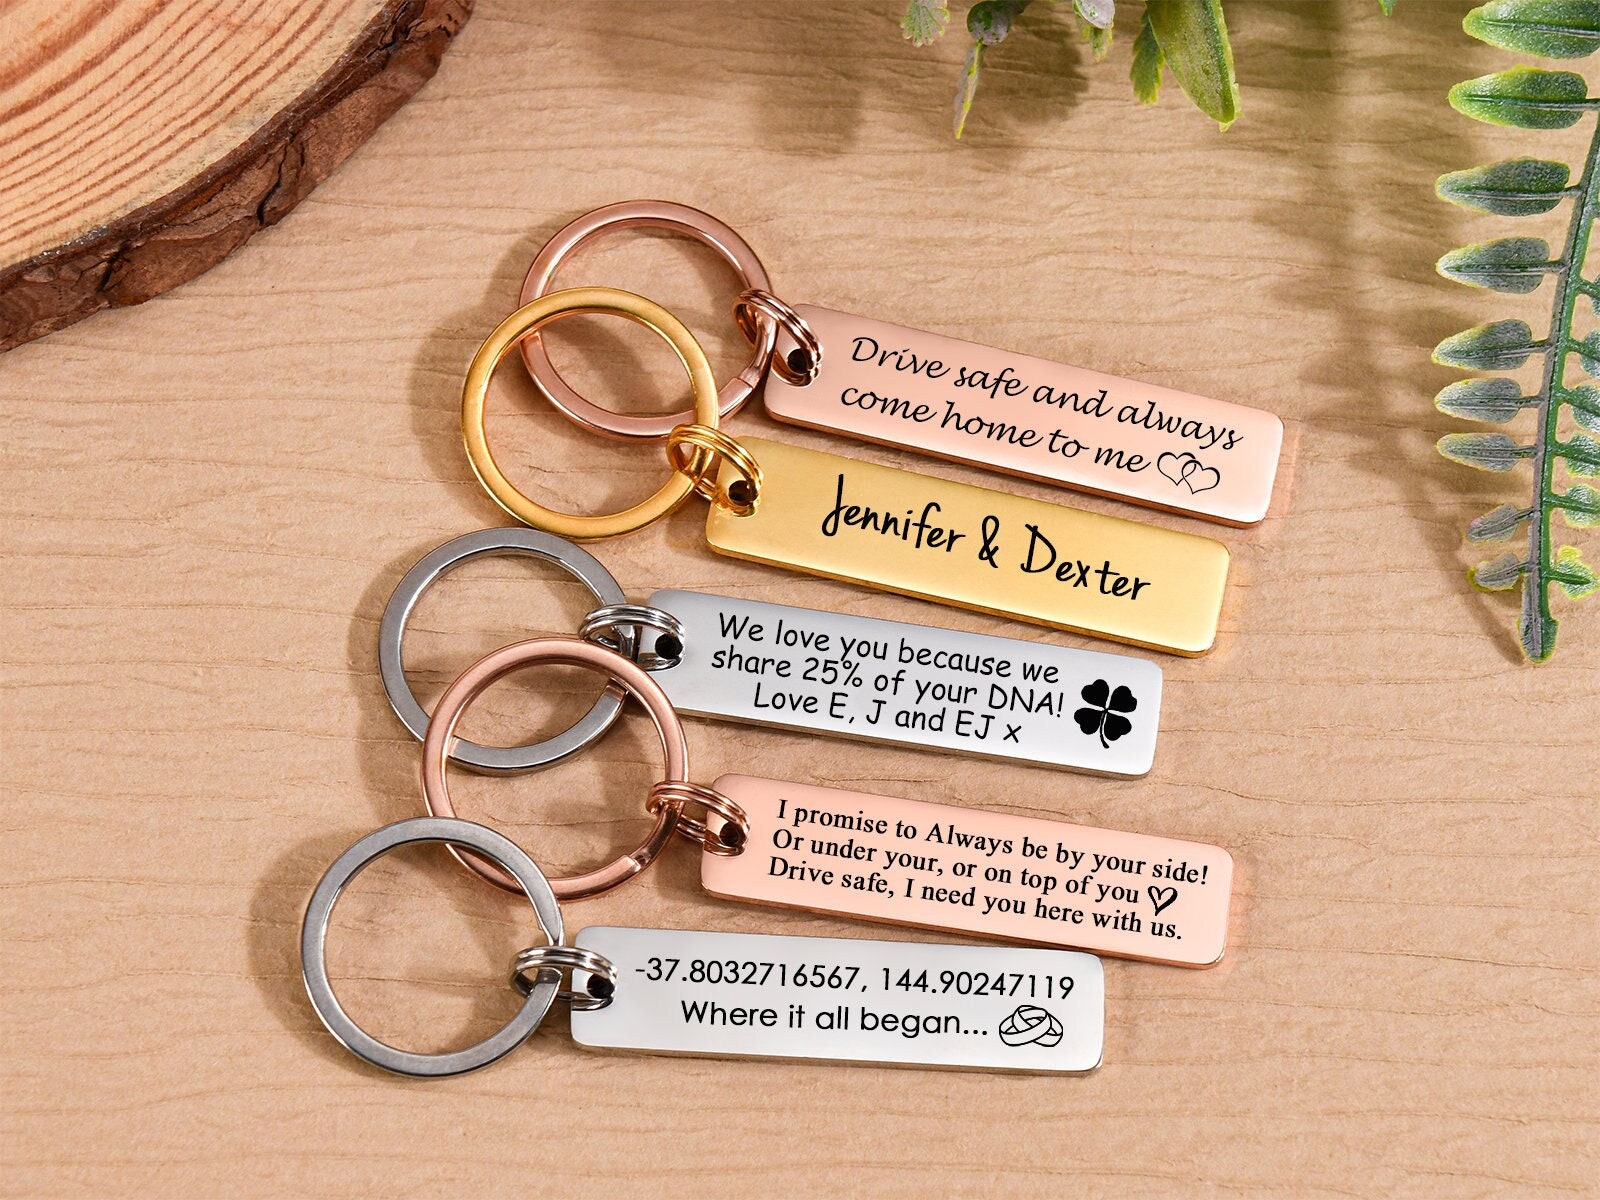 Wrapsify Engraved Keychain - Be Safe Always Come Home to Me - Gkc14038 Buy Keychain Only